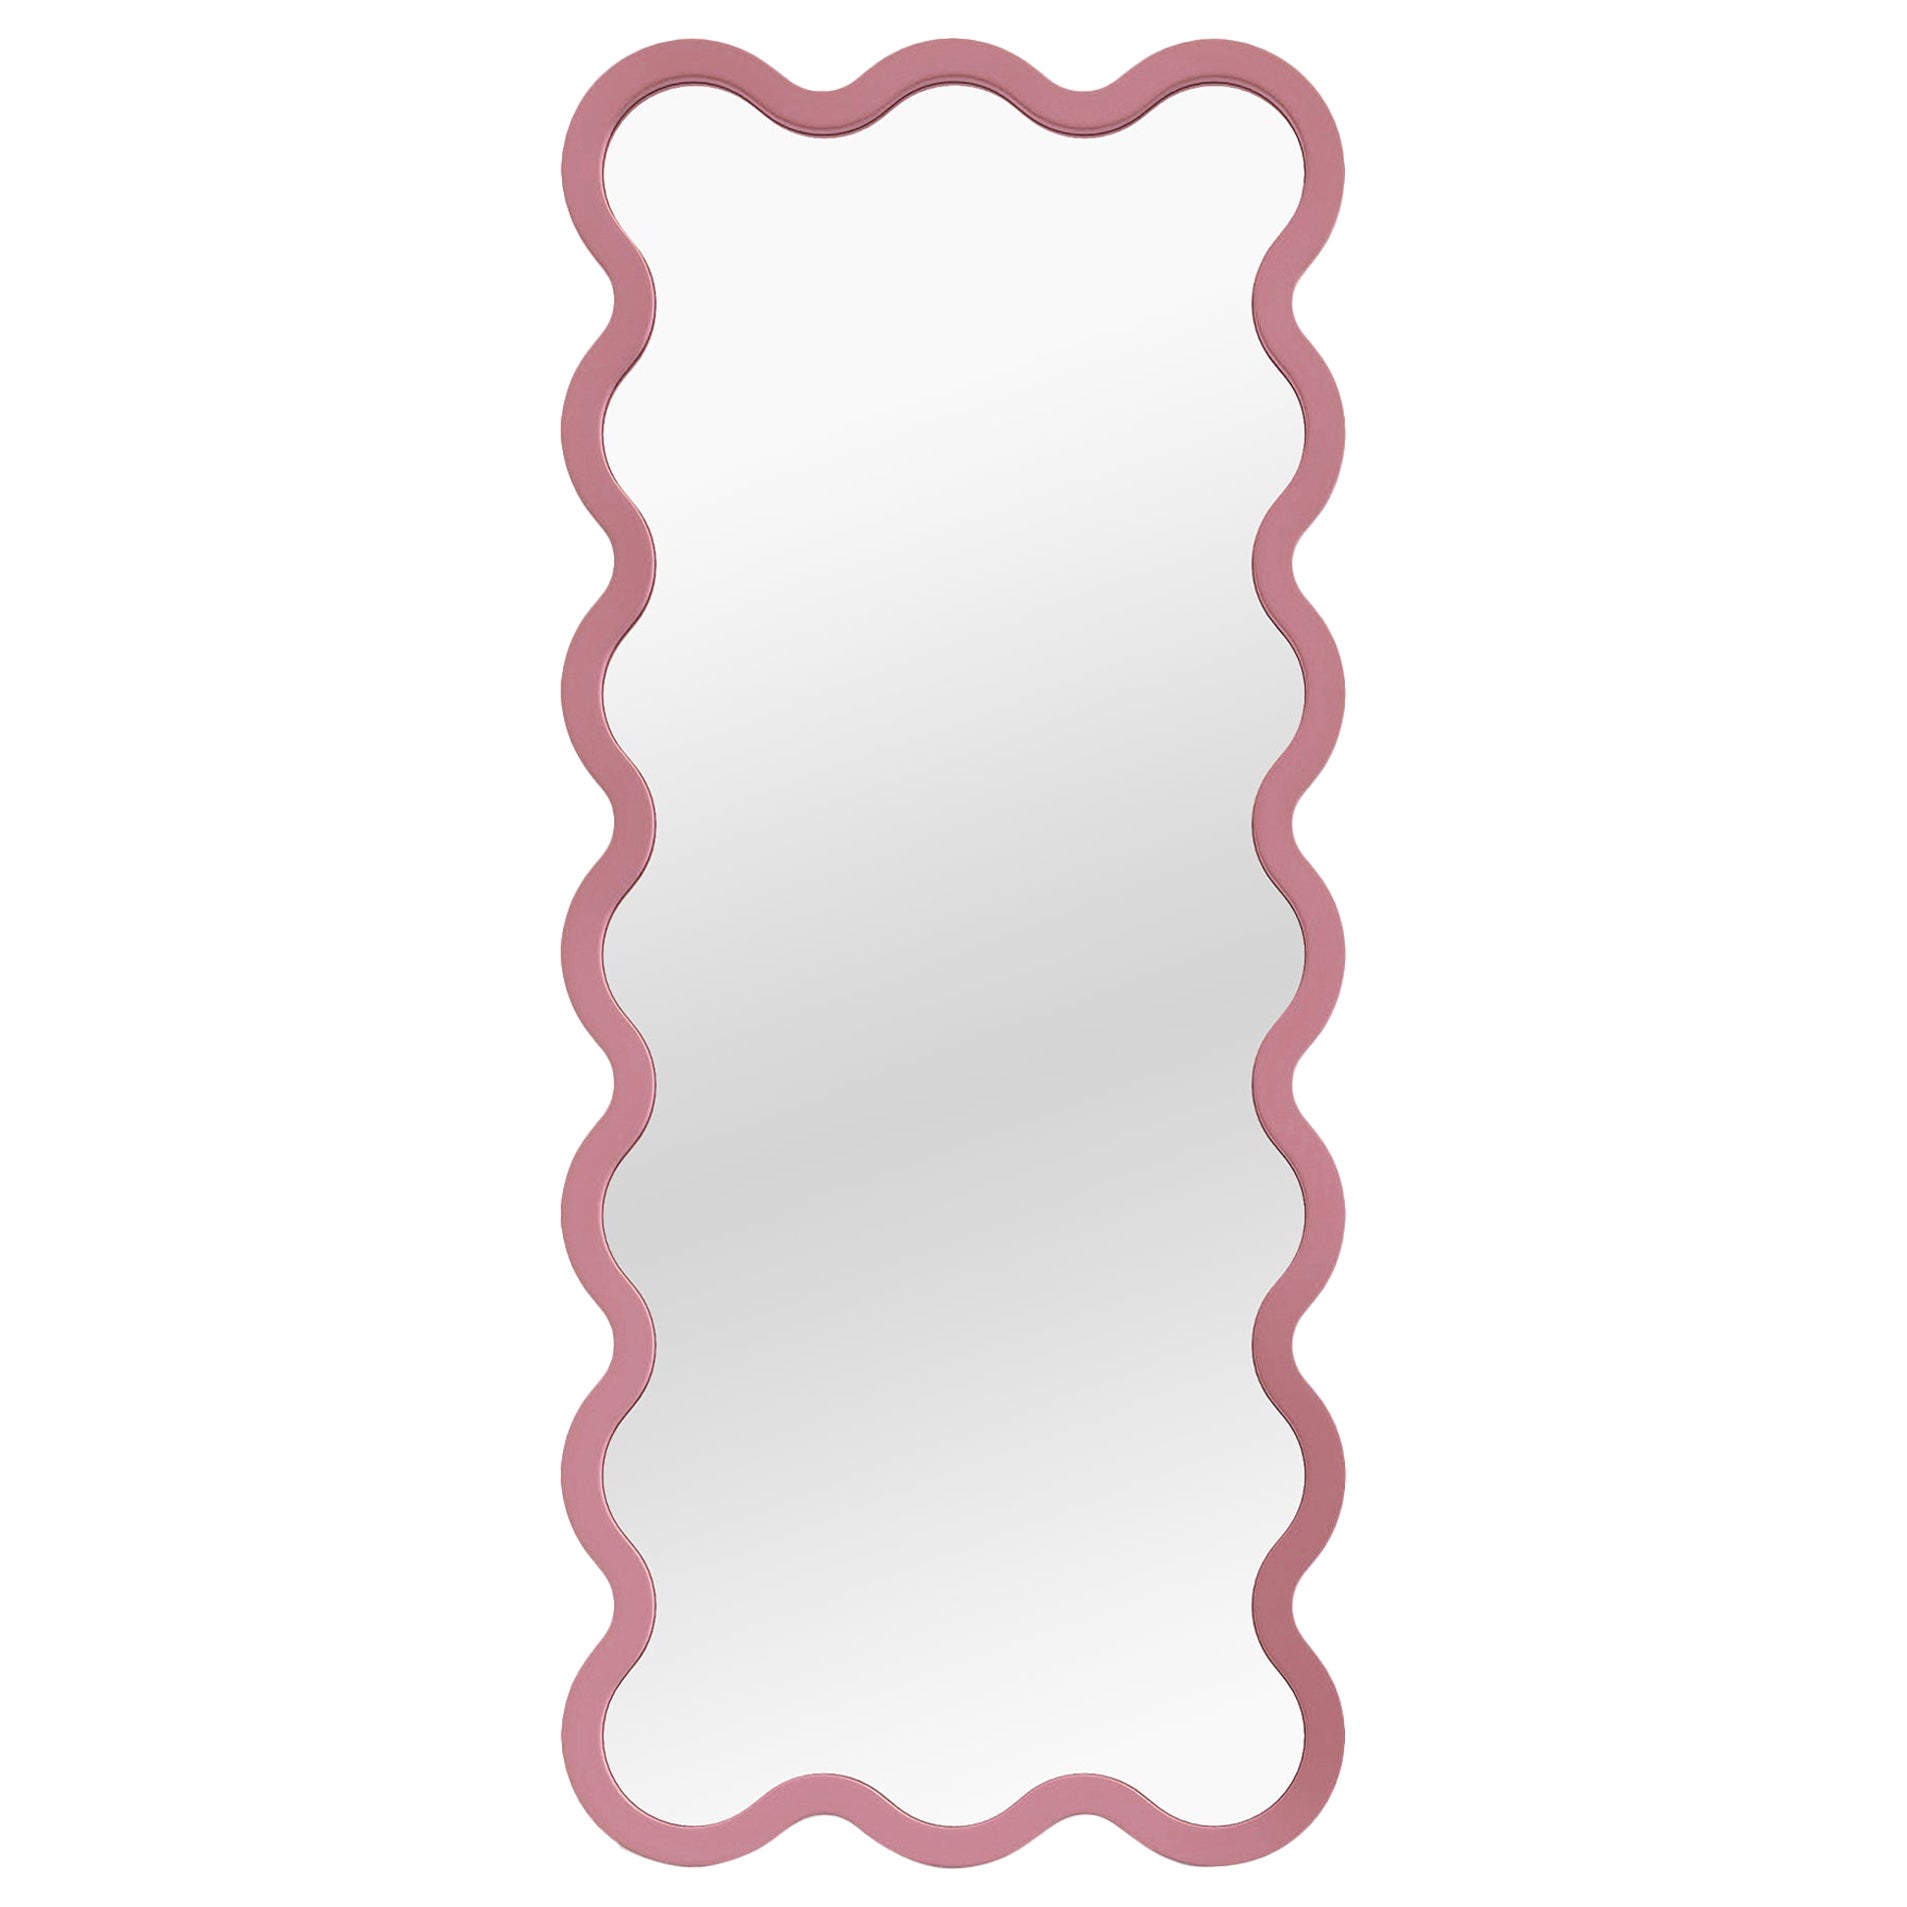 Contemporary Mirror 'Hvyli 16' by Oitoproducts, Pink Frame For Sale